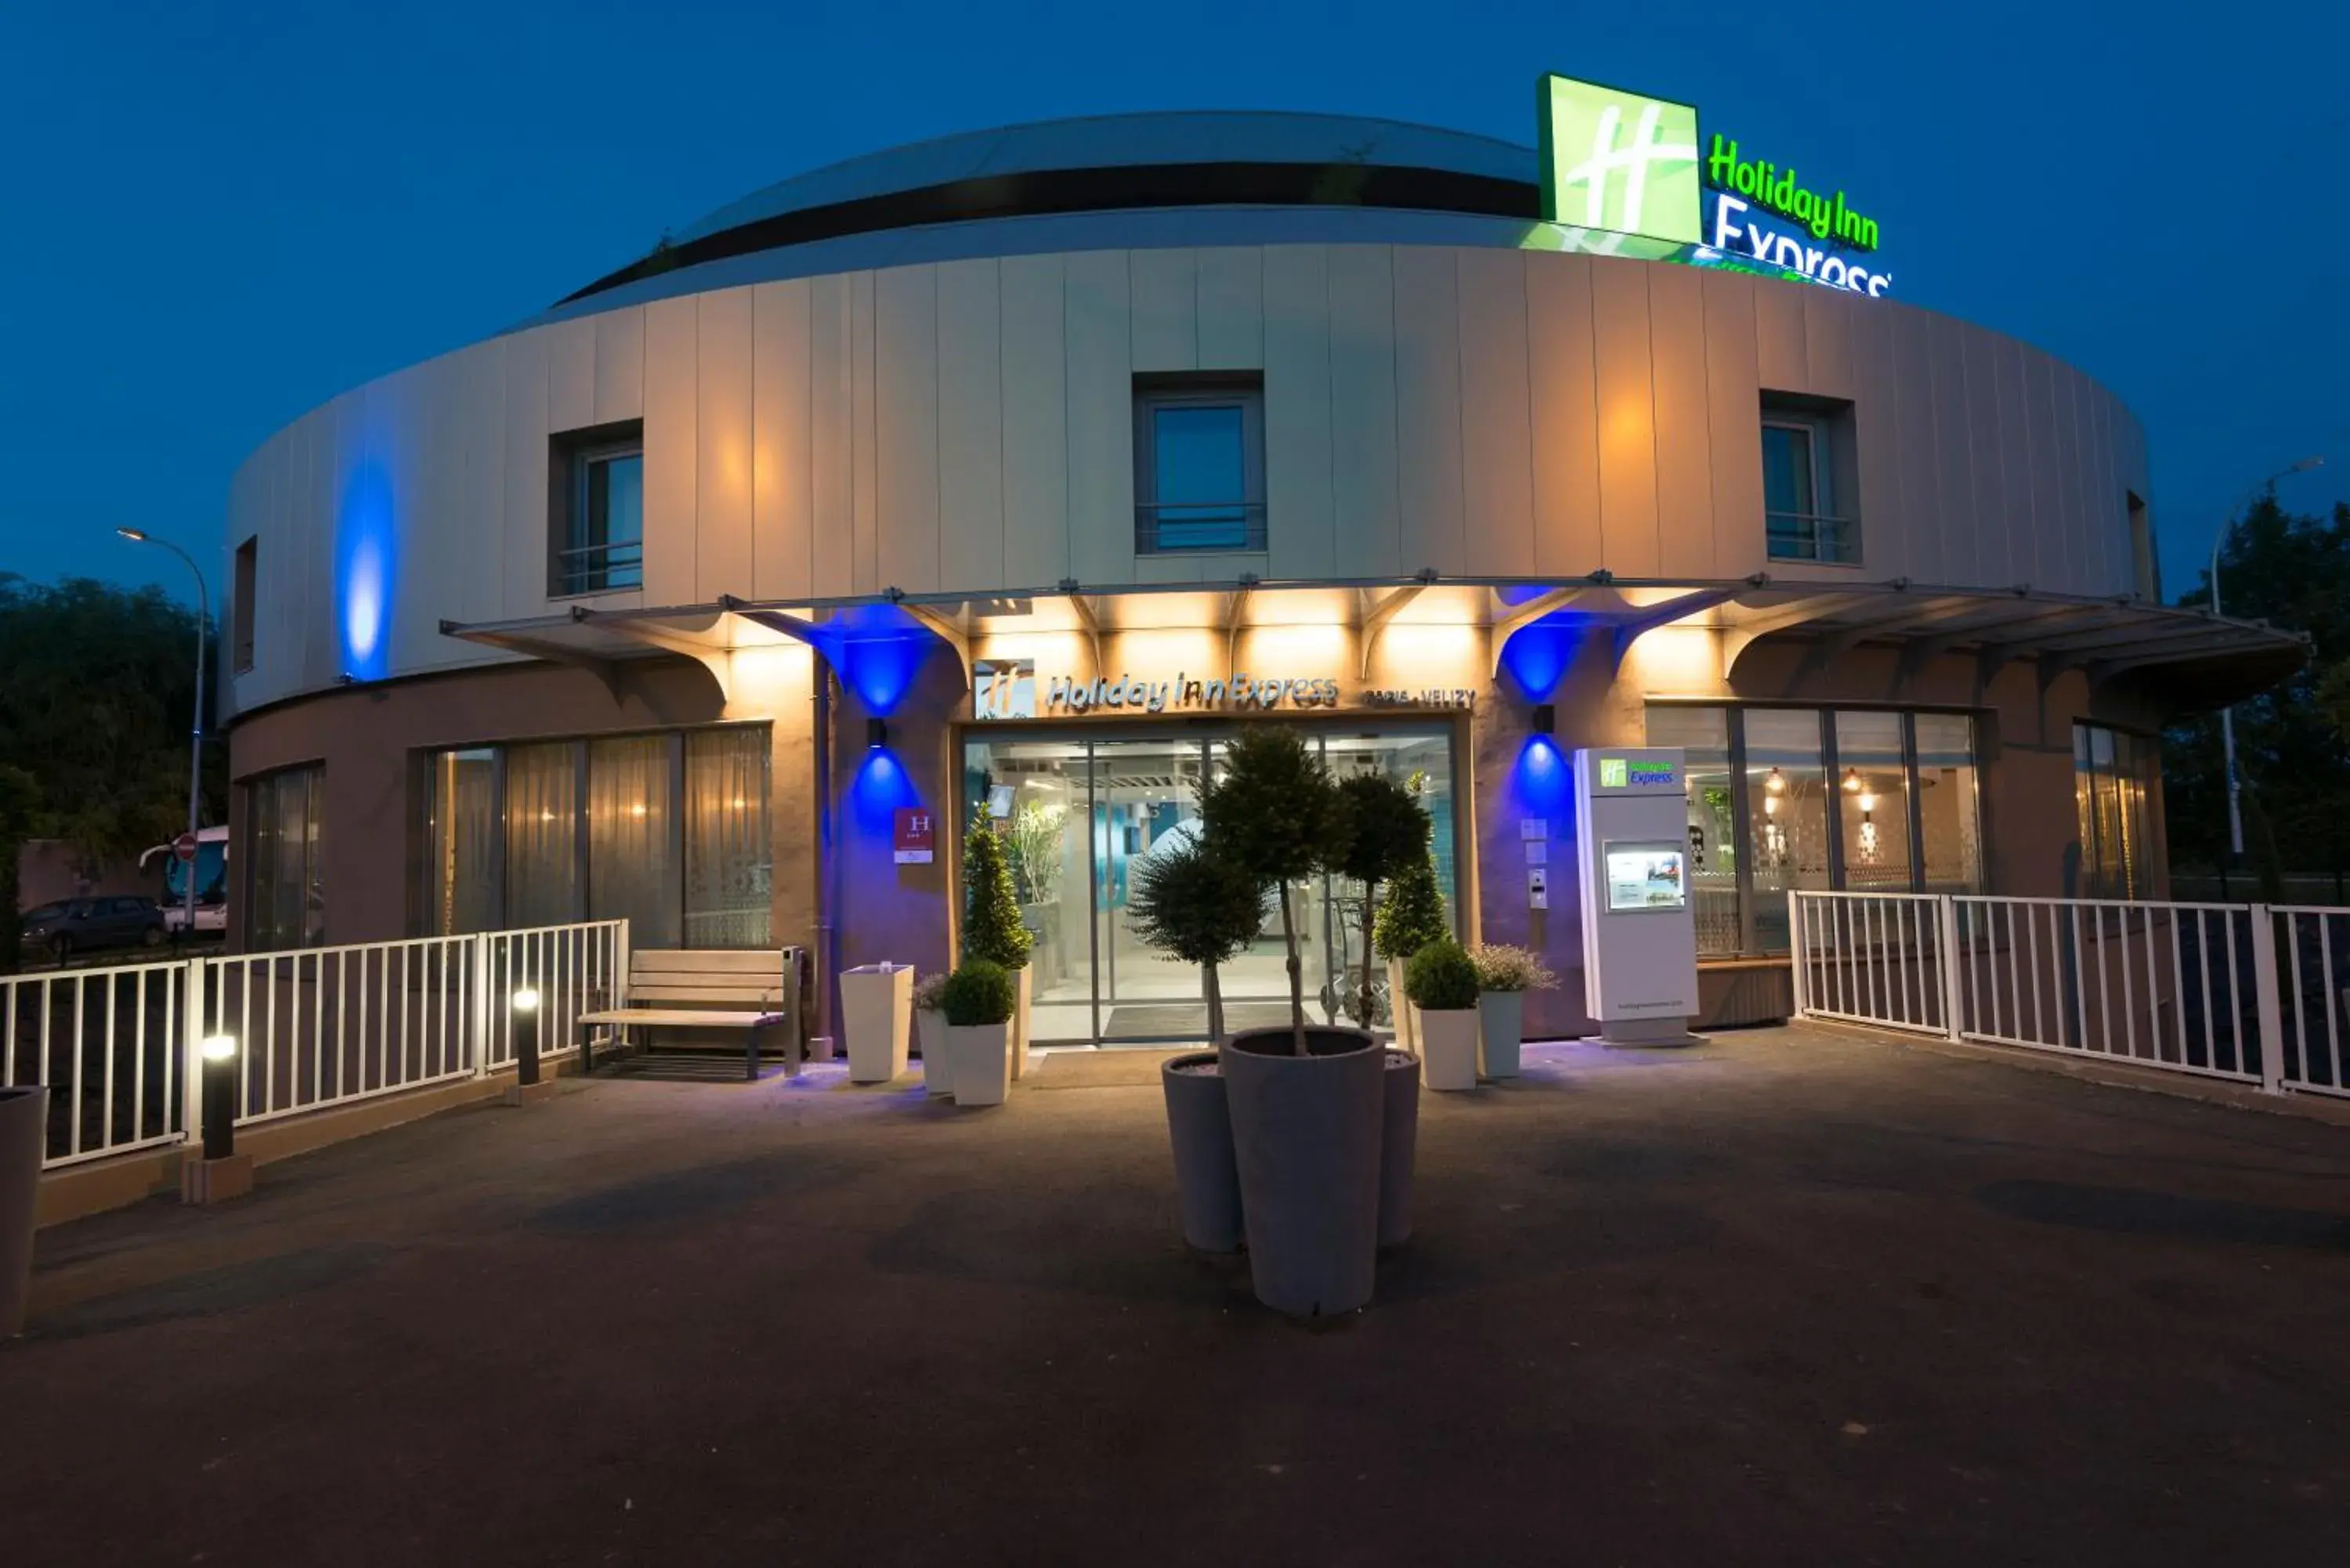 Property building in Holiday Inn Express Paris - Velizy